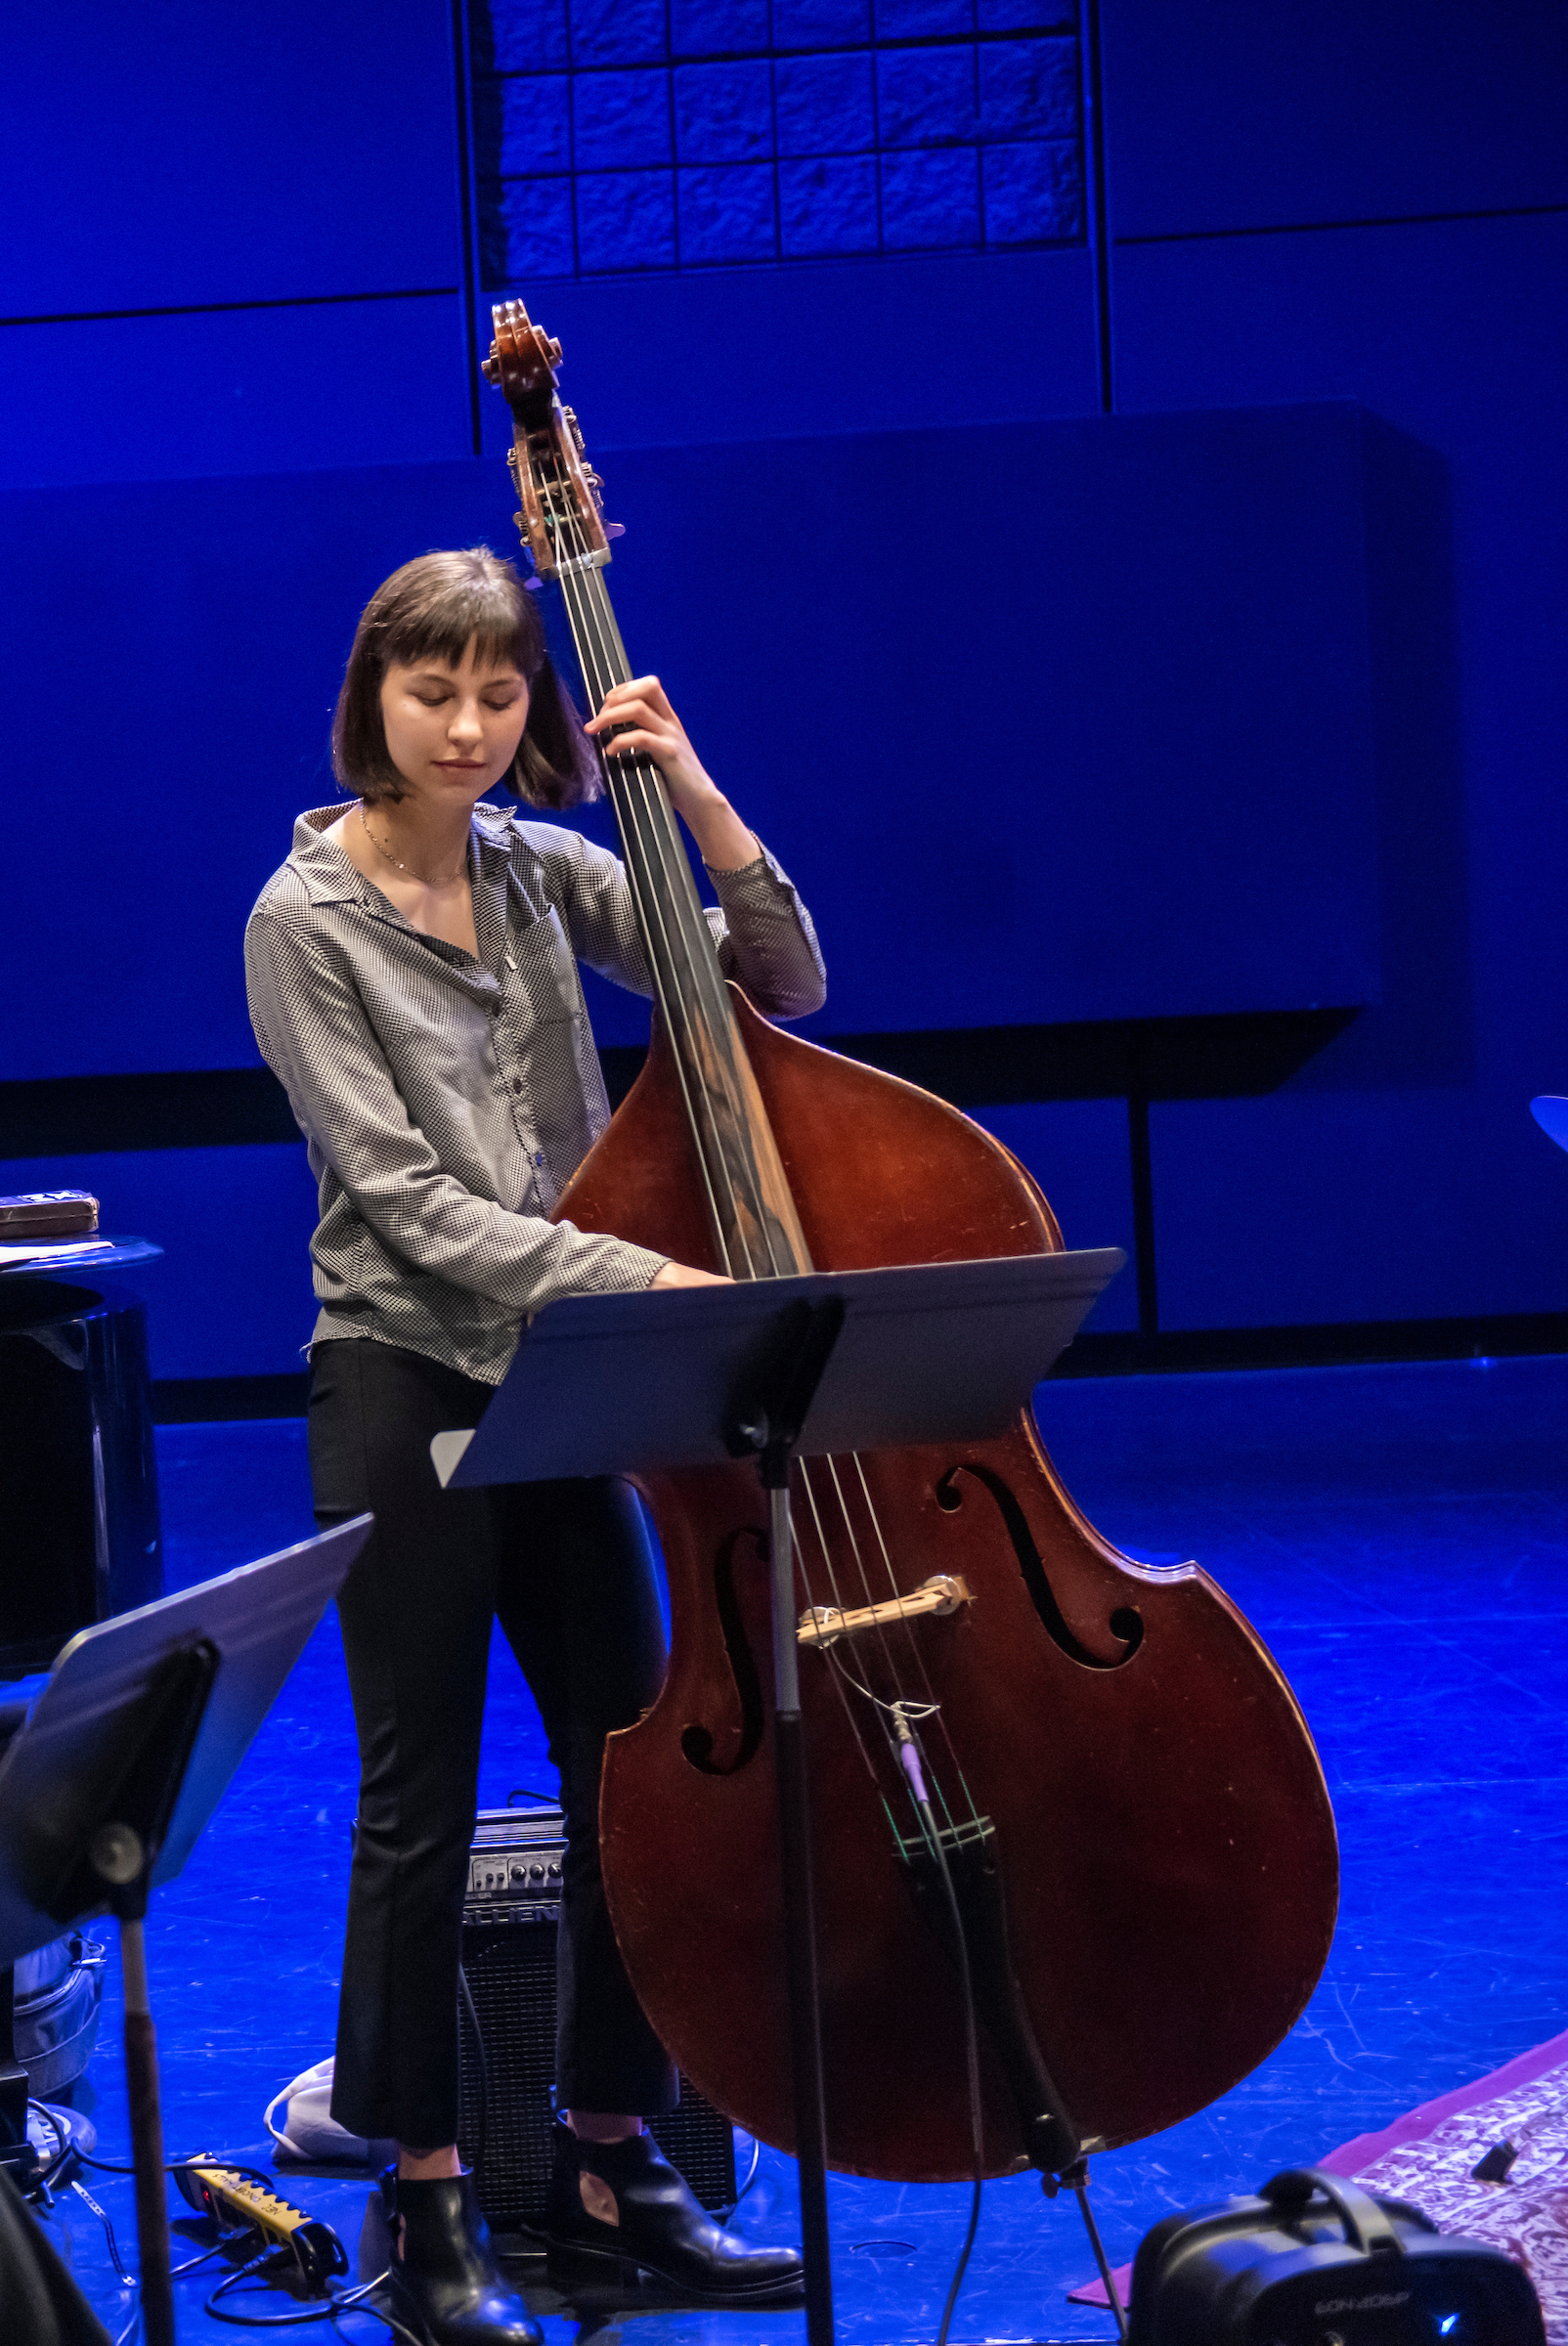 A bassist closes her eyes and smiles while playing in a jazz small ensemble.